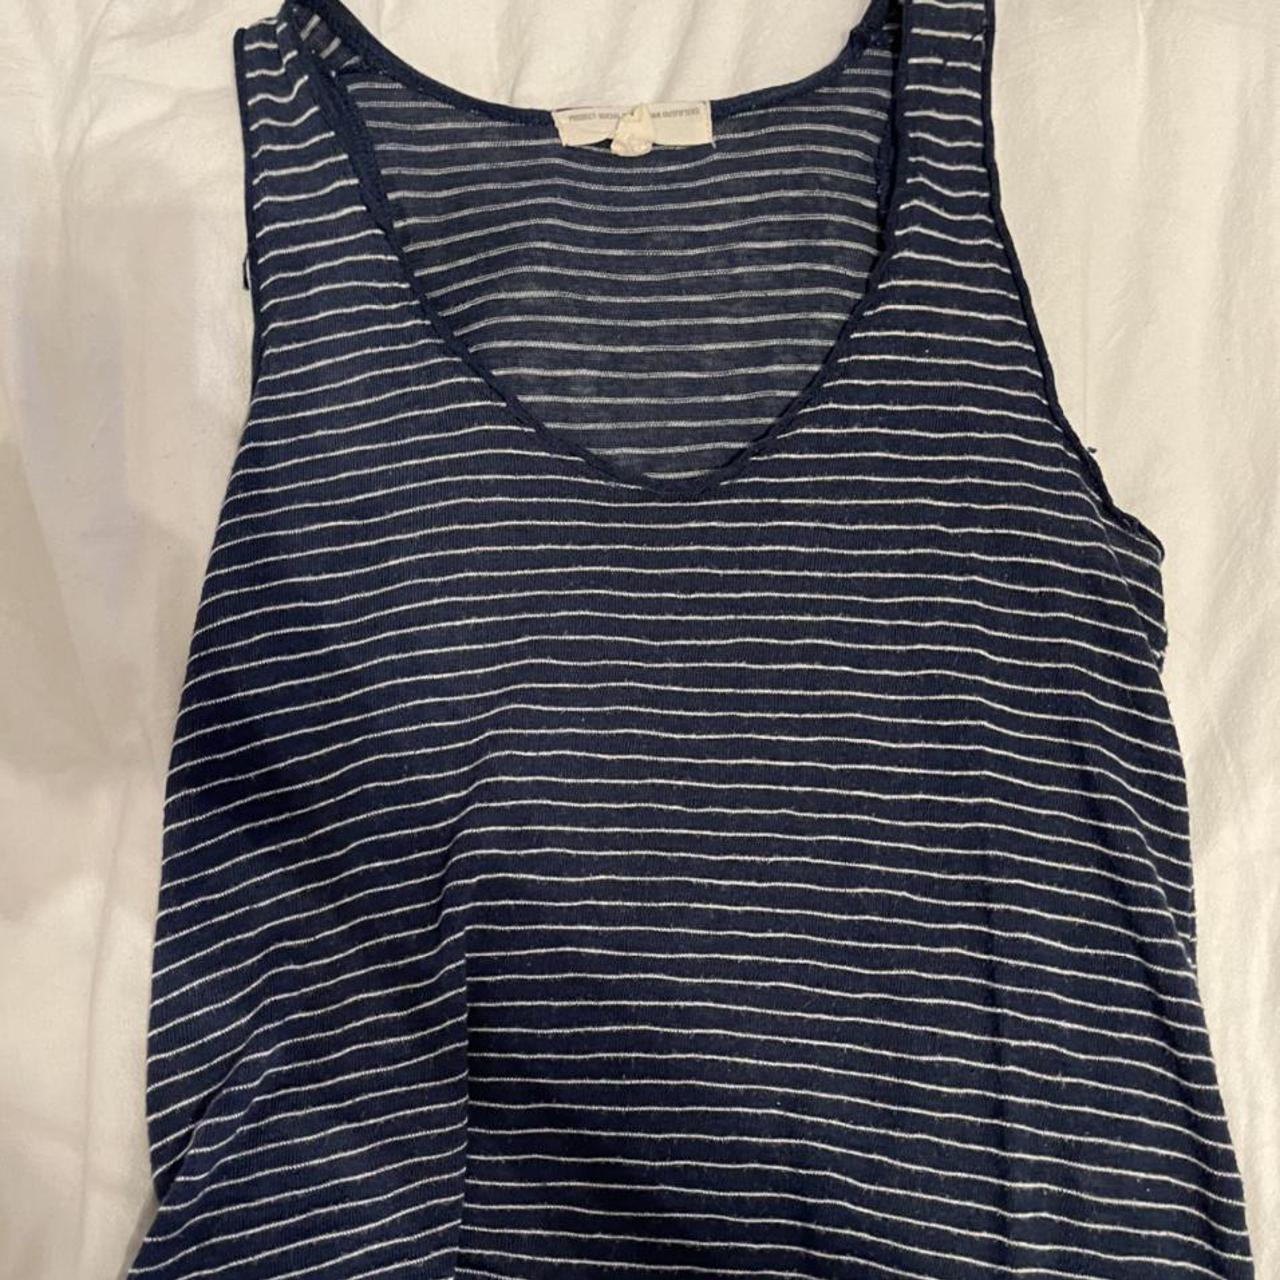 Urban Outfitters Women's Navy and White Vest